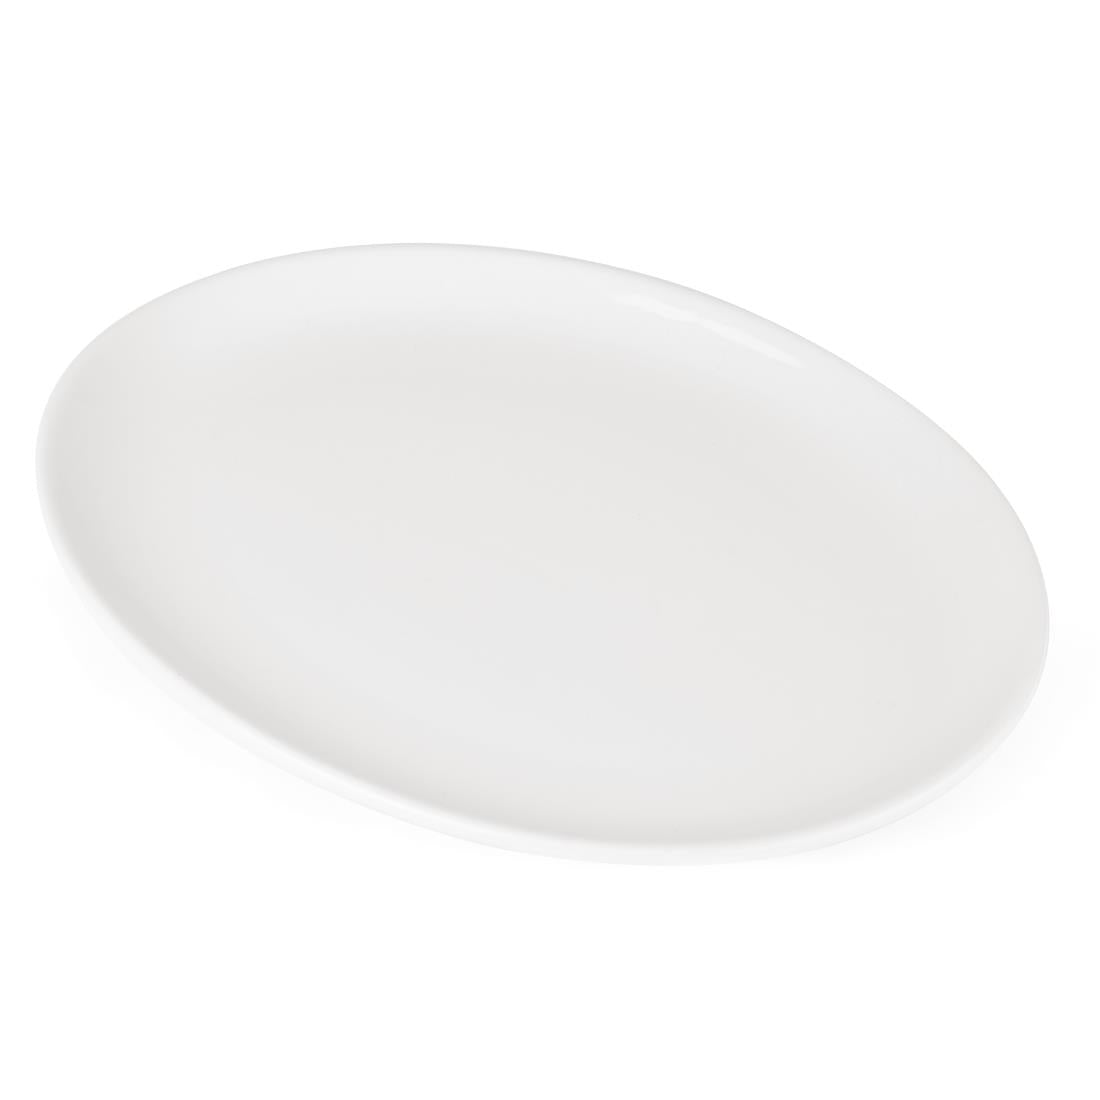 Athena Hotelware Oval Coupe Plates 305 x 241 mm (Pack of 6) JD Catering Equipment Solutions Ltd